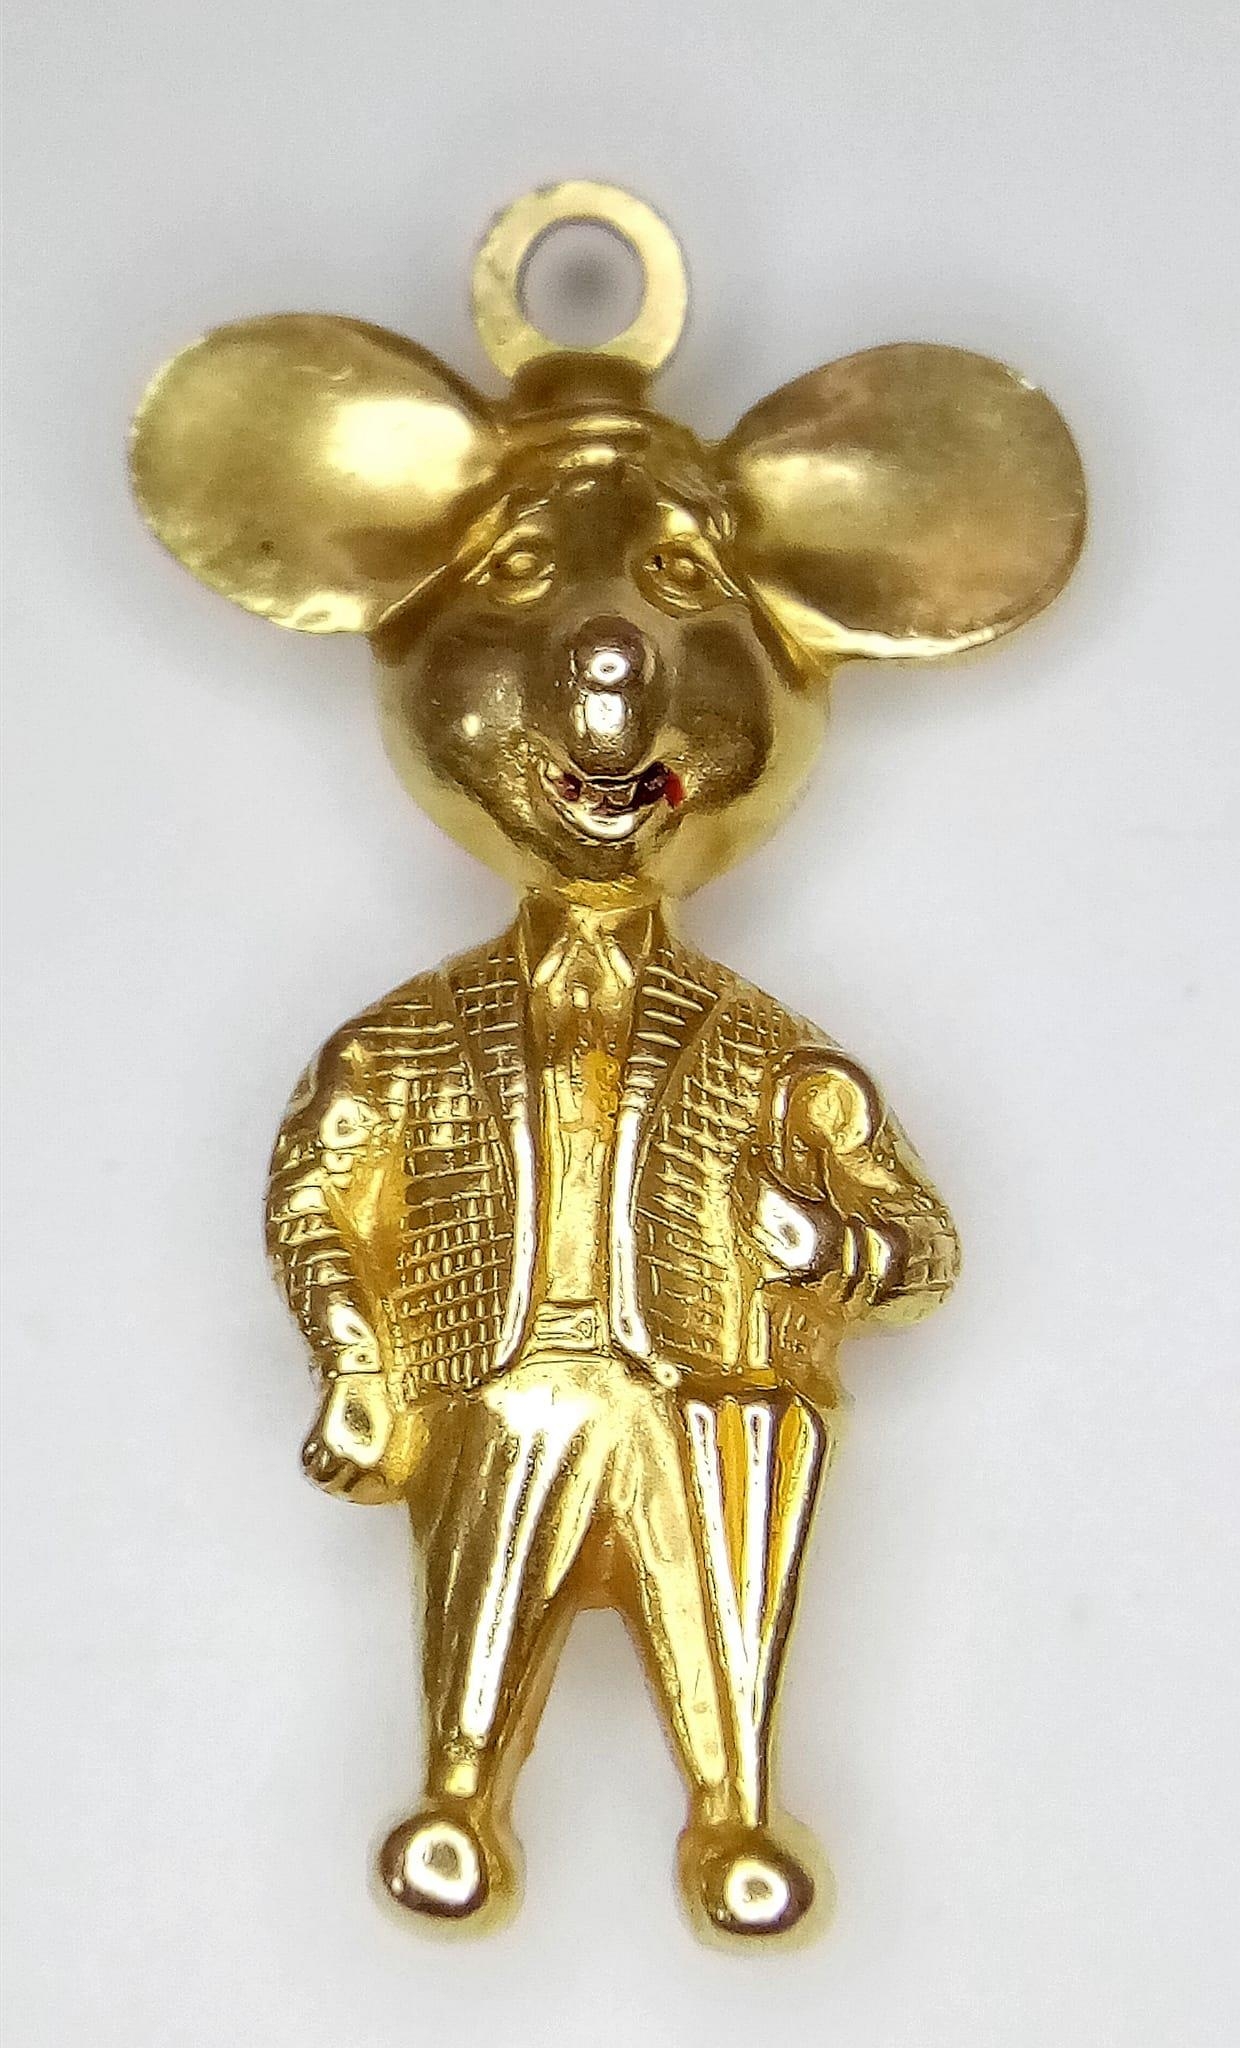 A Vintage 18K Yellow Gold Gentleman Mouse Pendant/Charm. 3cm. 2.66g weight.